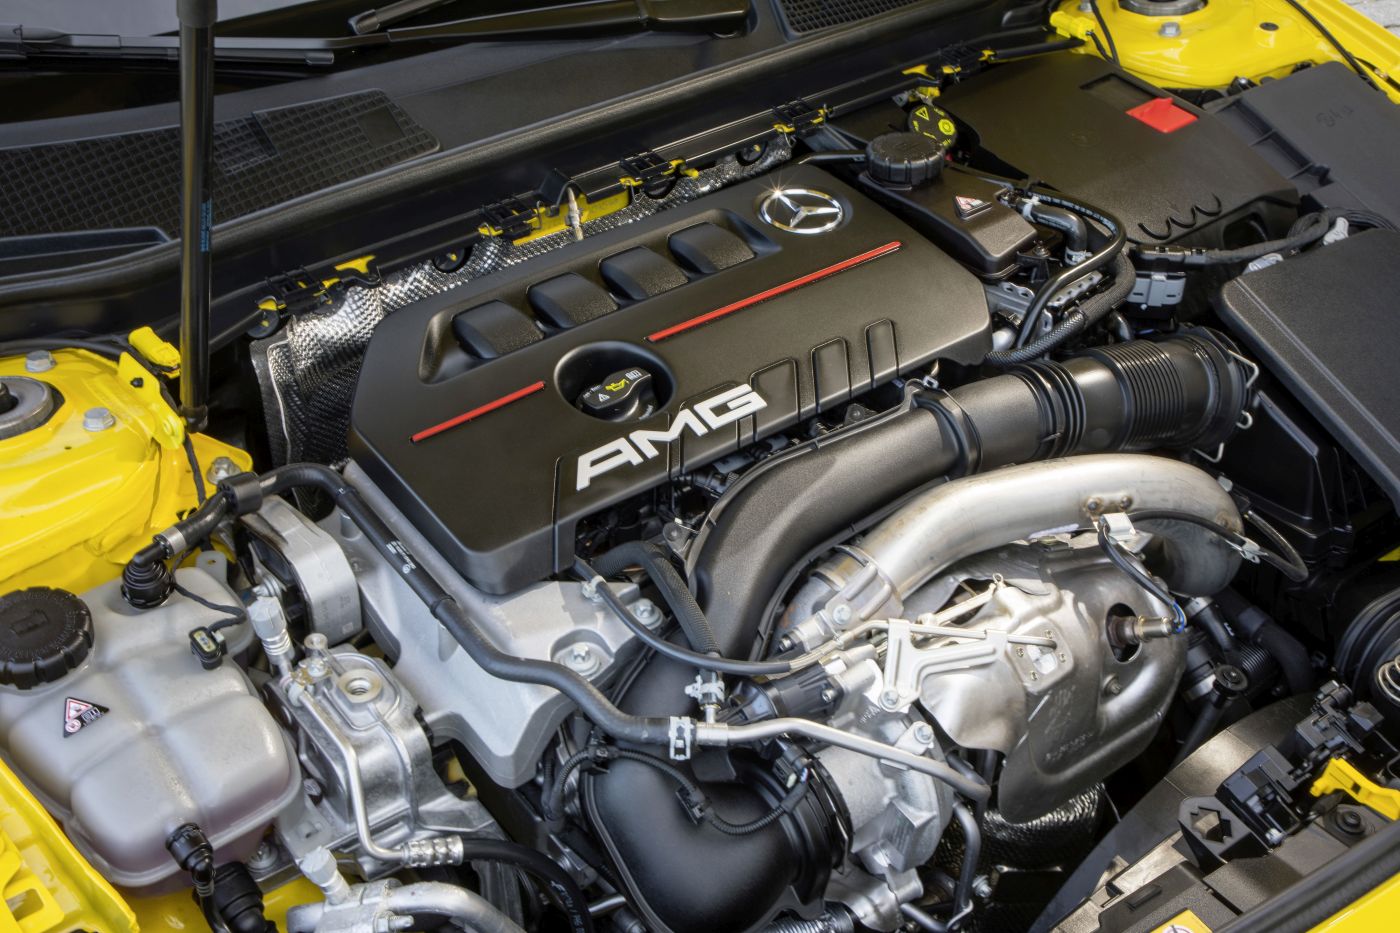 Mercedes-AMG A 35 4MATIC: Neuer Einstieg in die Welt der Driving PerformanceMercedes-AMG A 35 4MATIC: New entry-level model opens up the world of driving performance